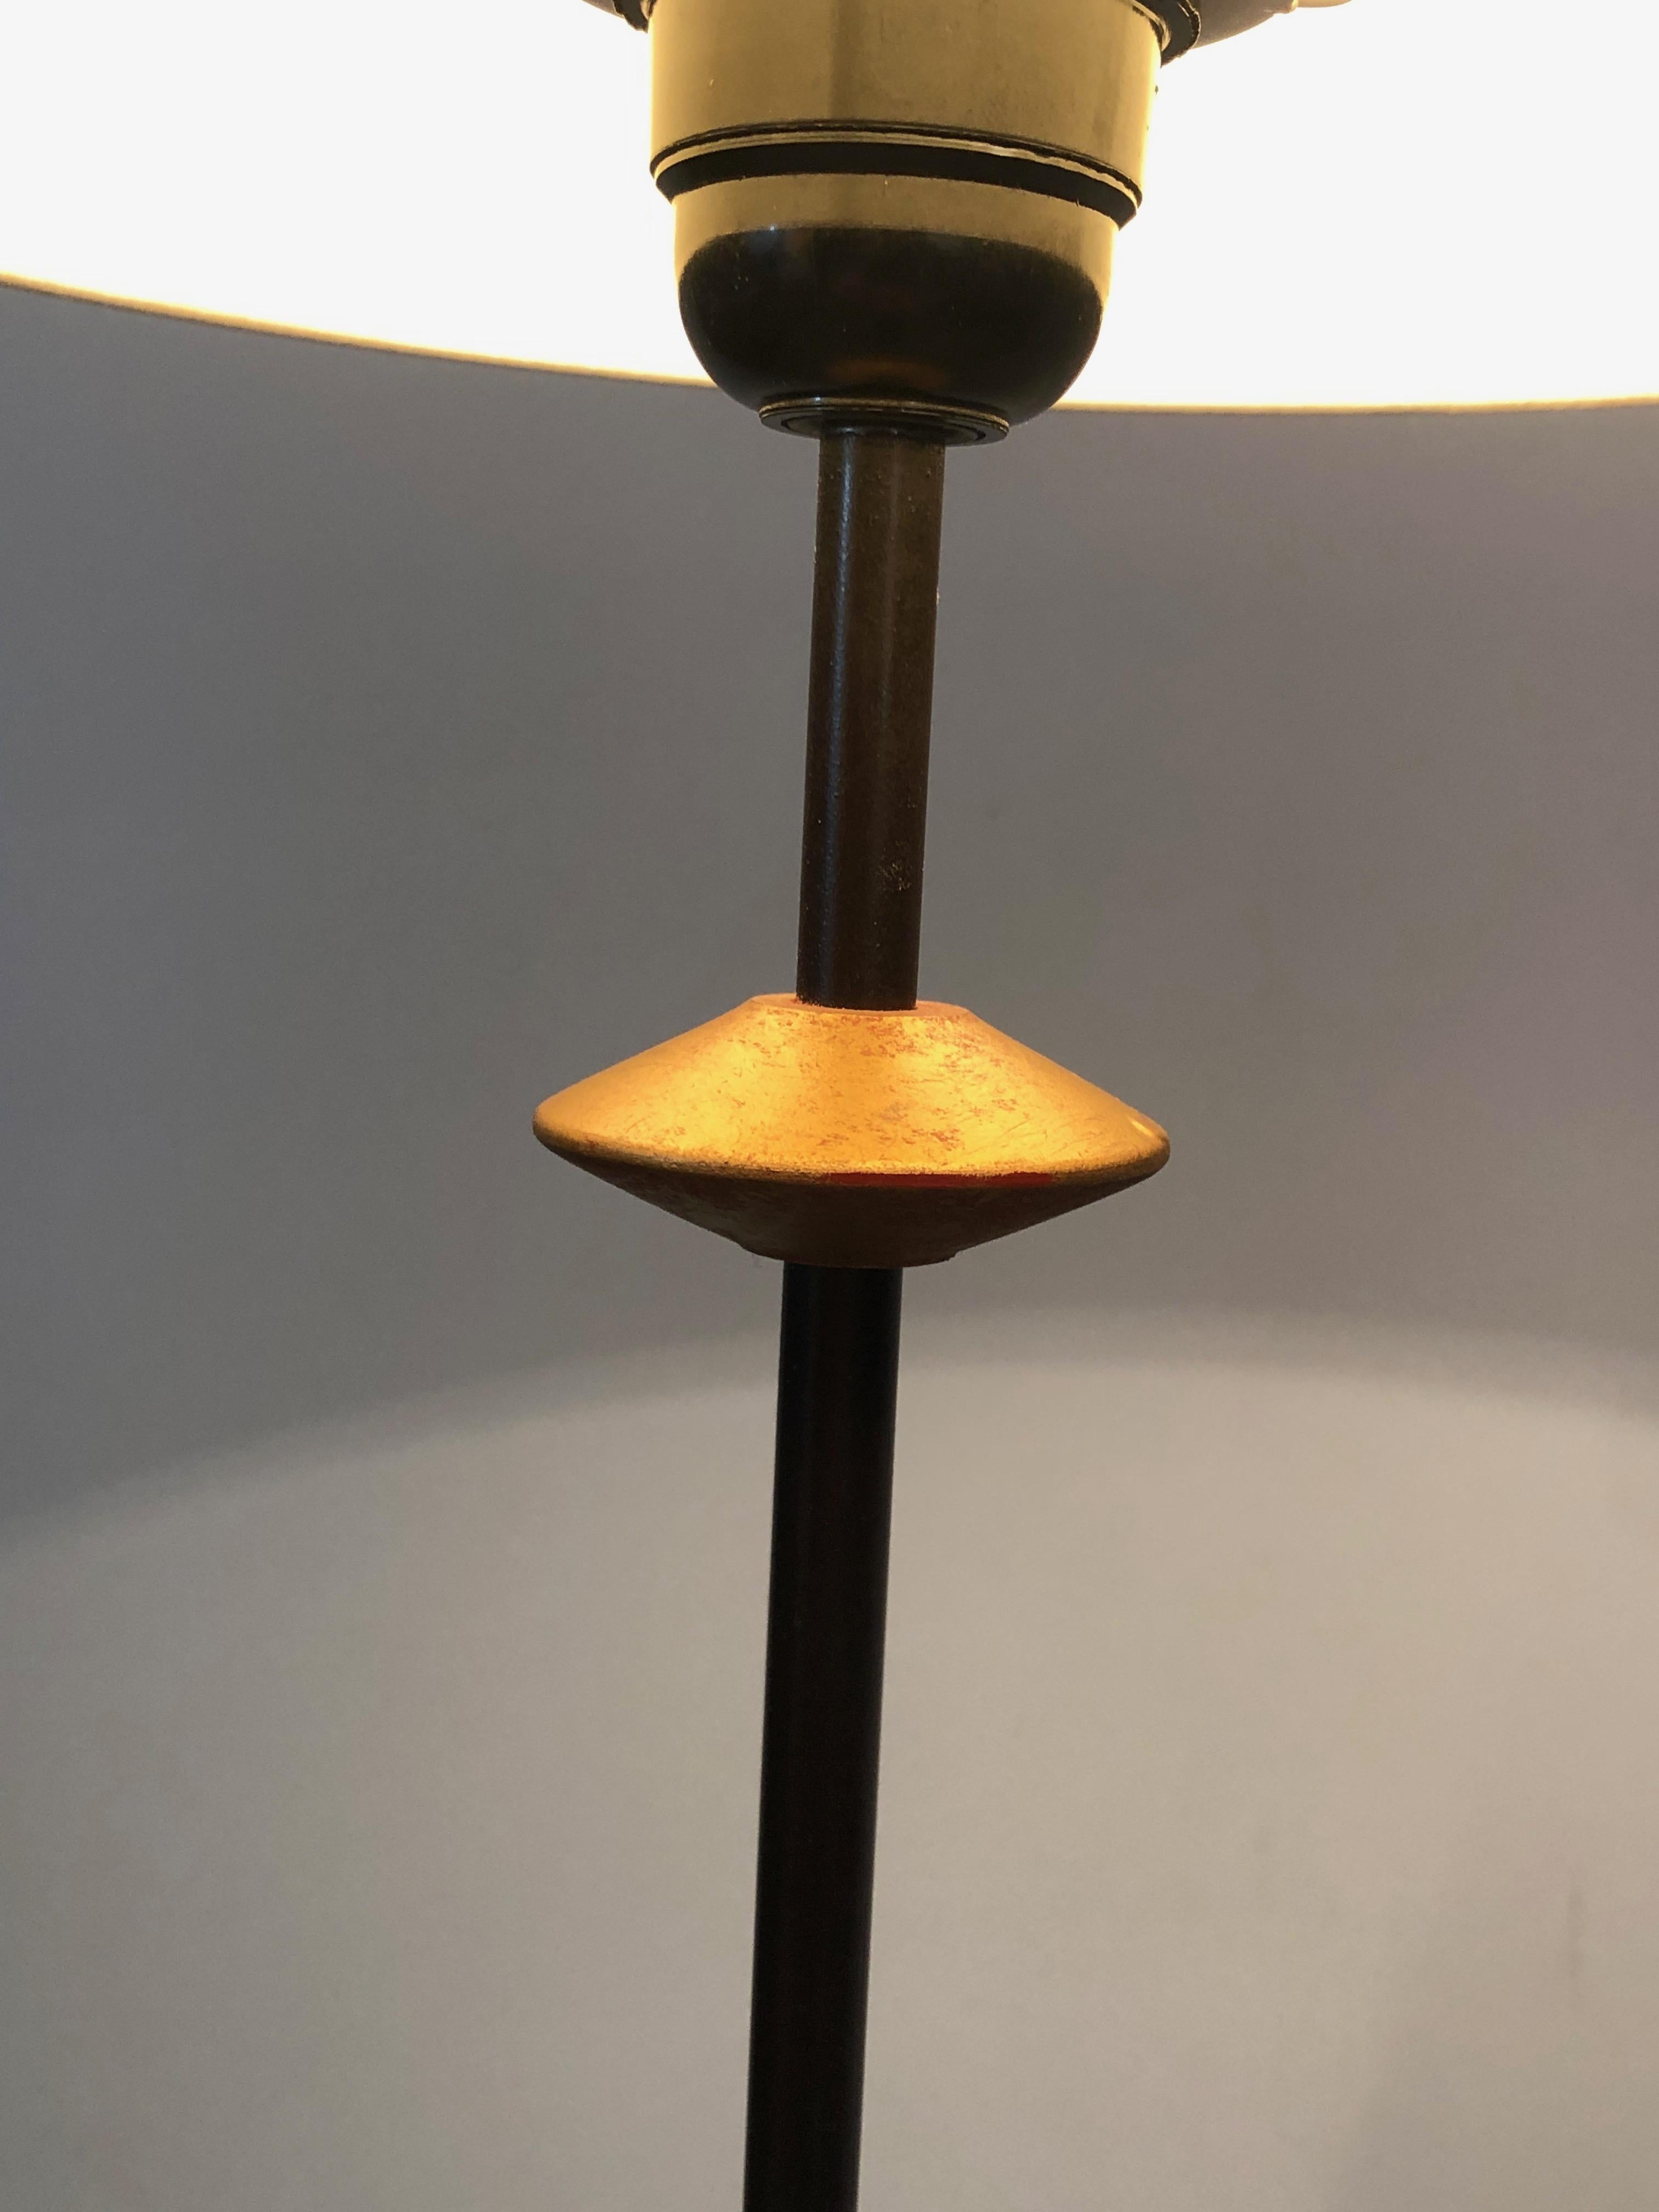 Late 20th Century Wrought Iron Floor Lamp with Cast Iron Base; French Work, circa 1970 For Sale